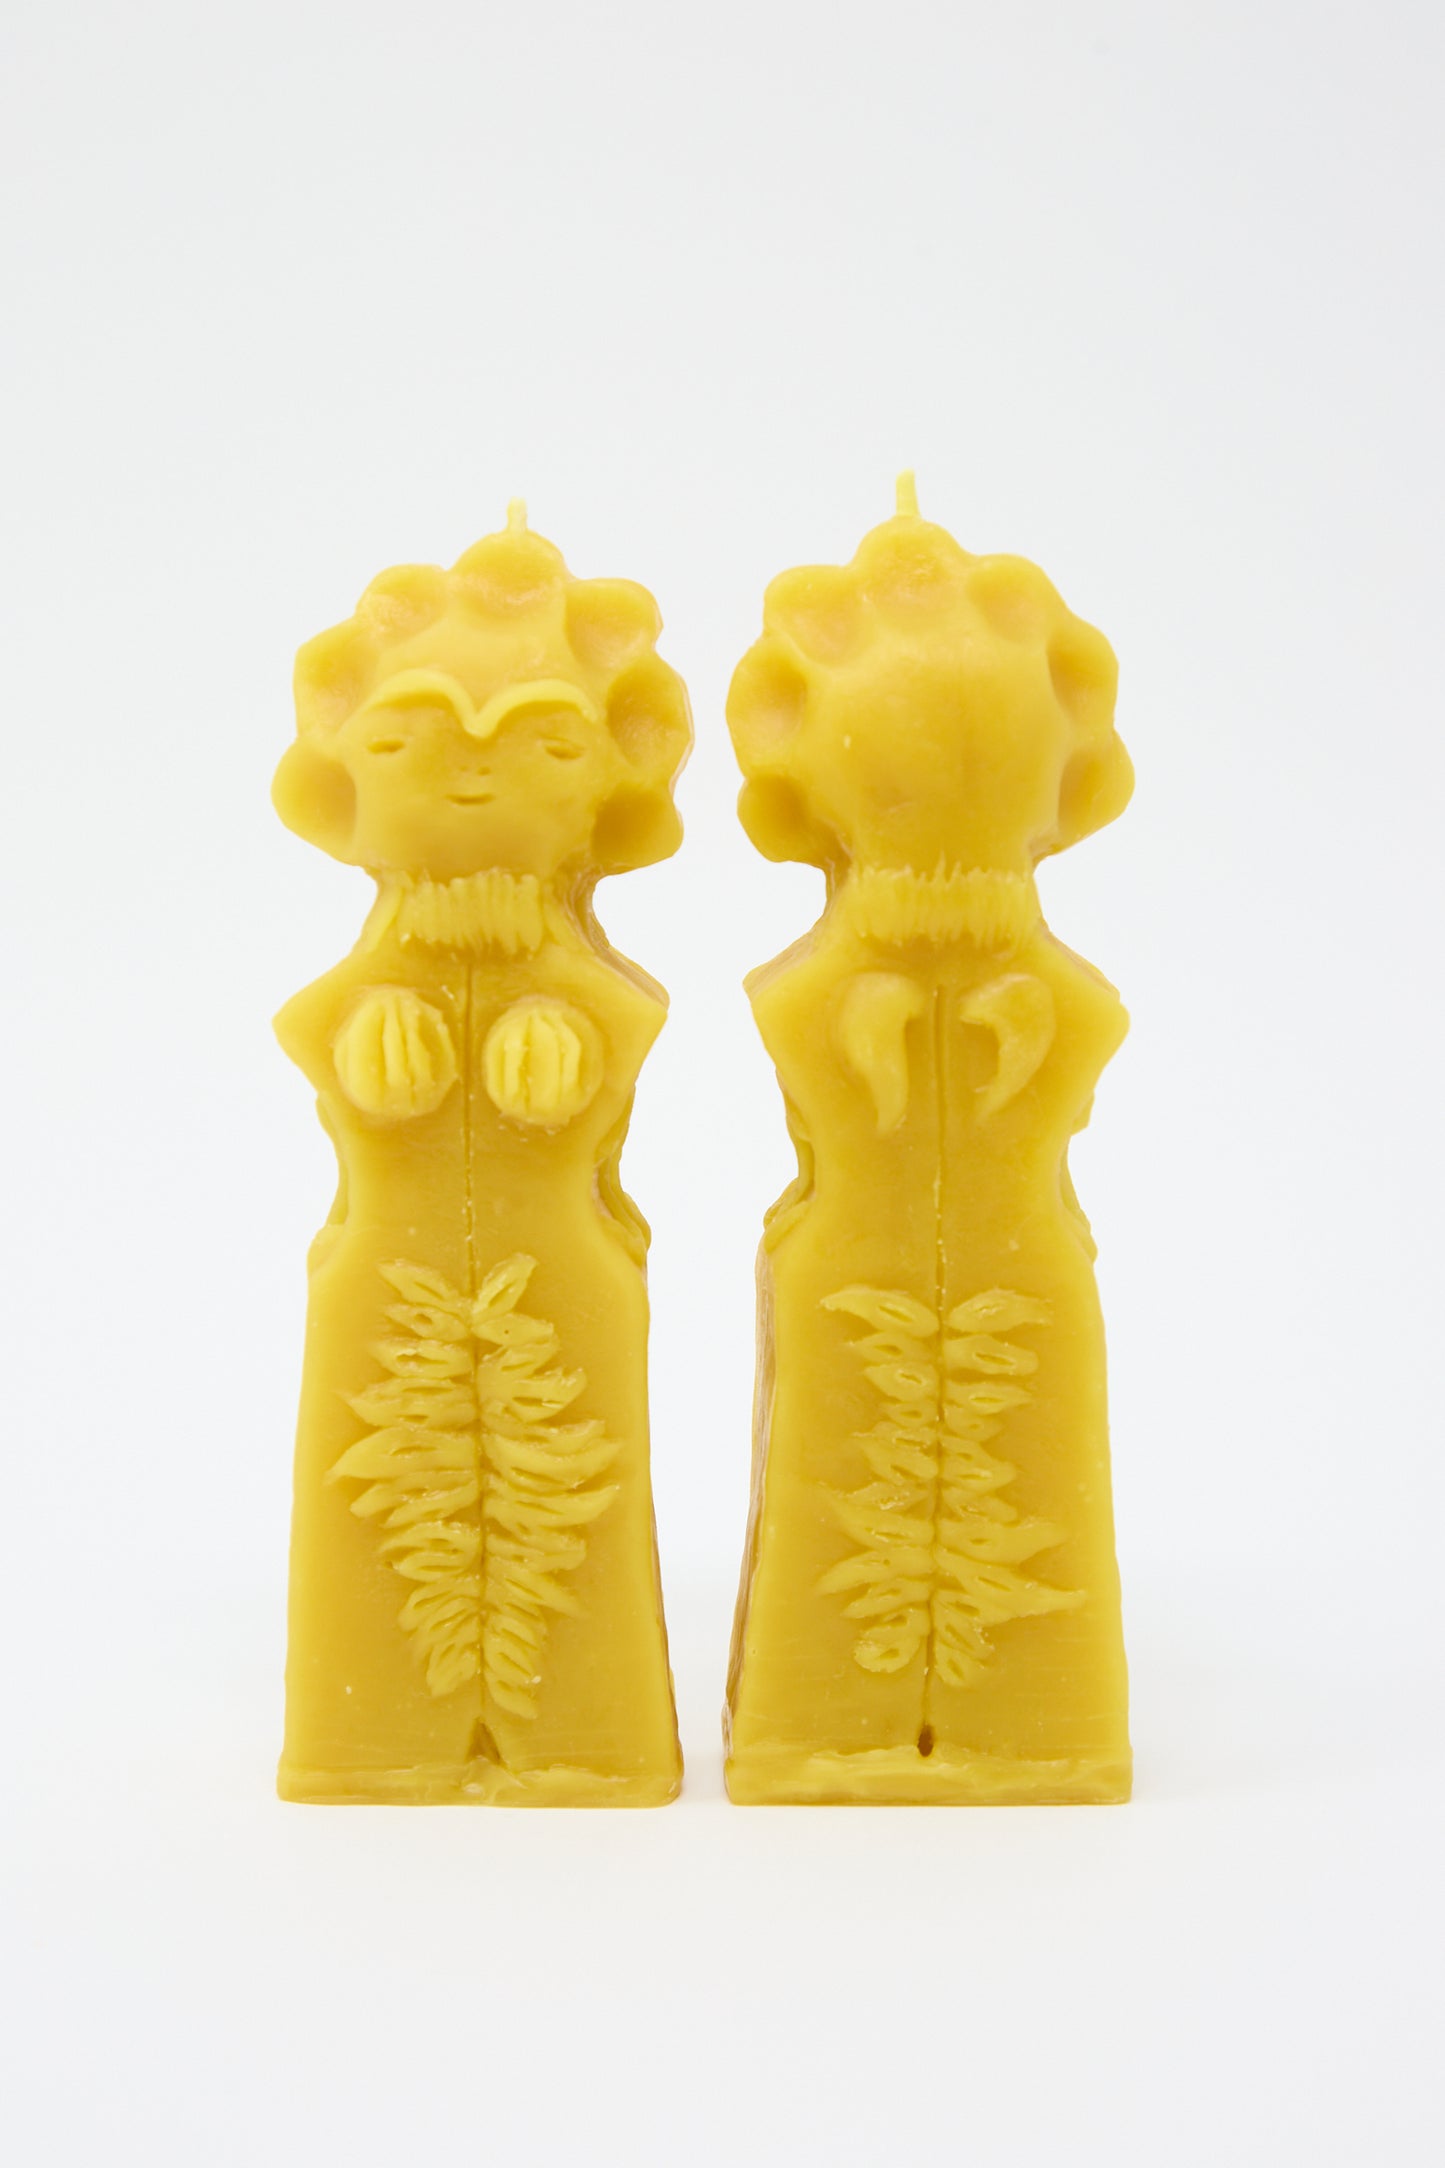 Two Moon Goddess Candles by Rinn to Hitsuji, shaped like figures and featuring detailed botanical patterns, stand against a white background.